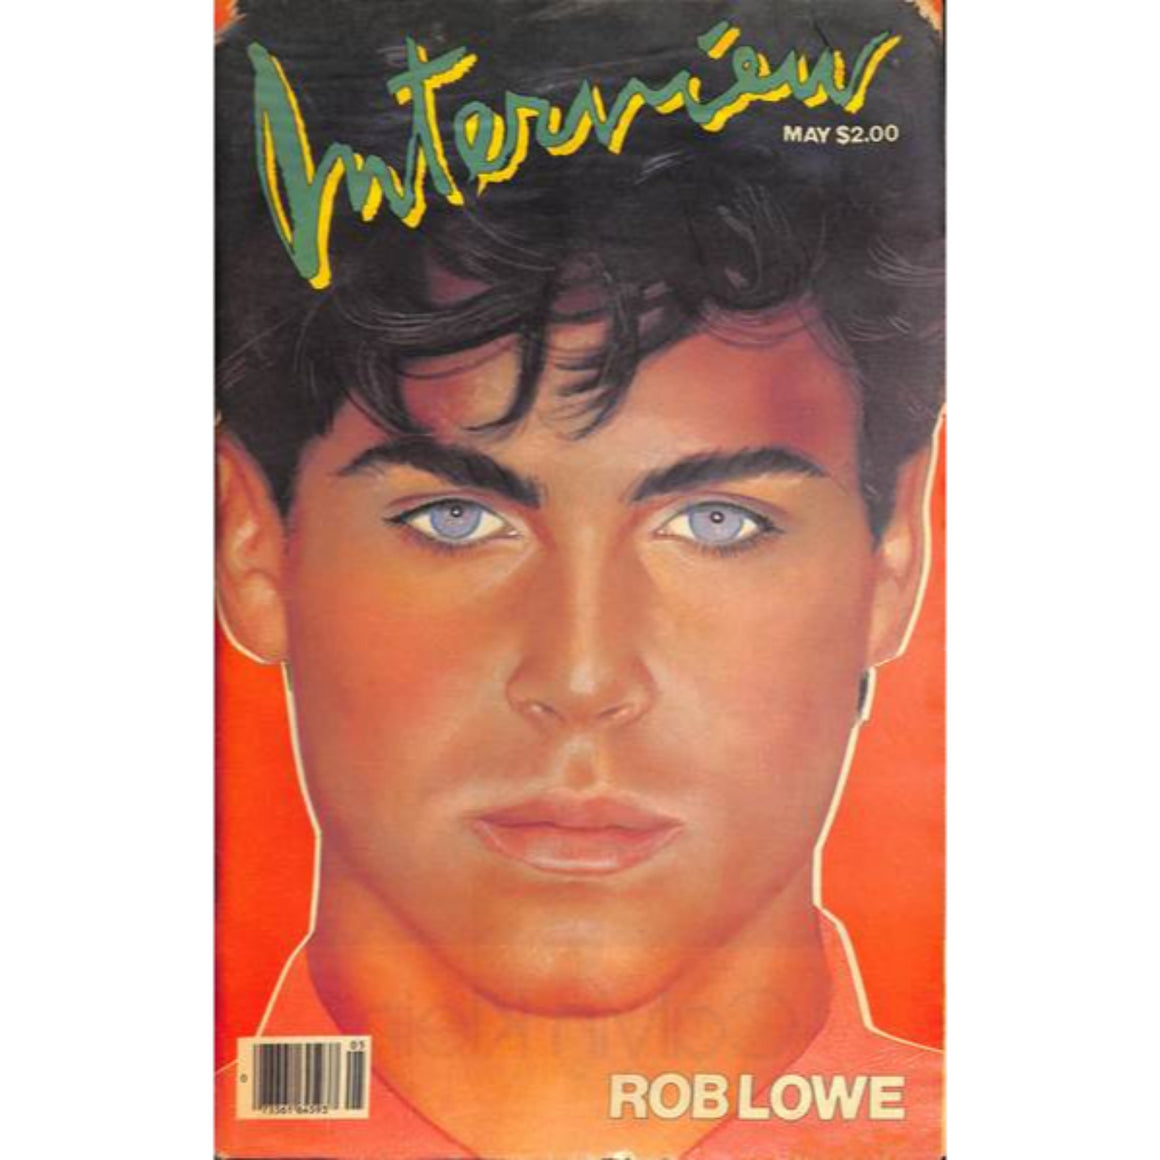 Andy Warhol's Interview Magazine: May w/ Rob Lowe (SOLD)